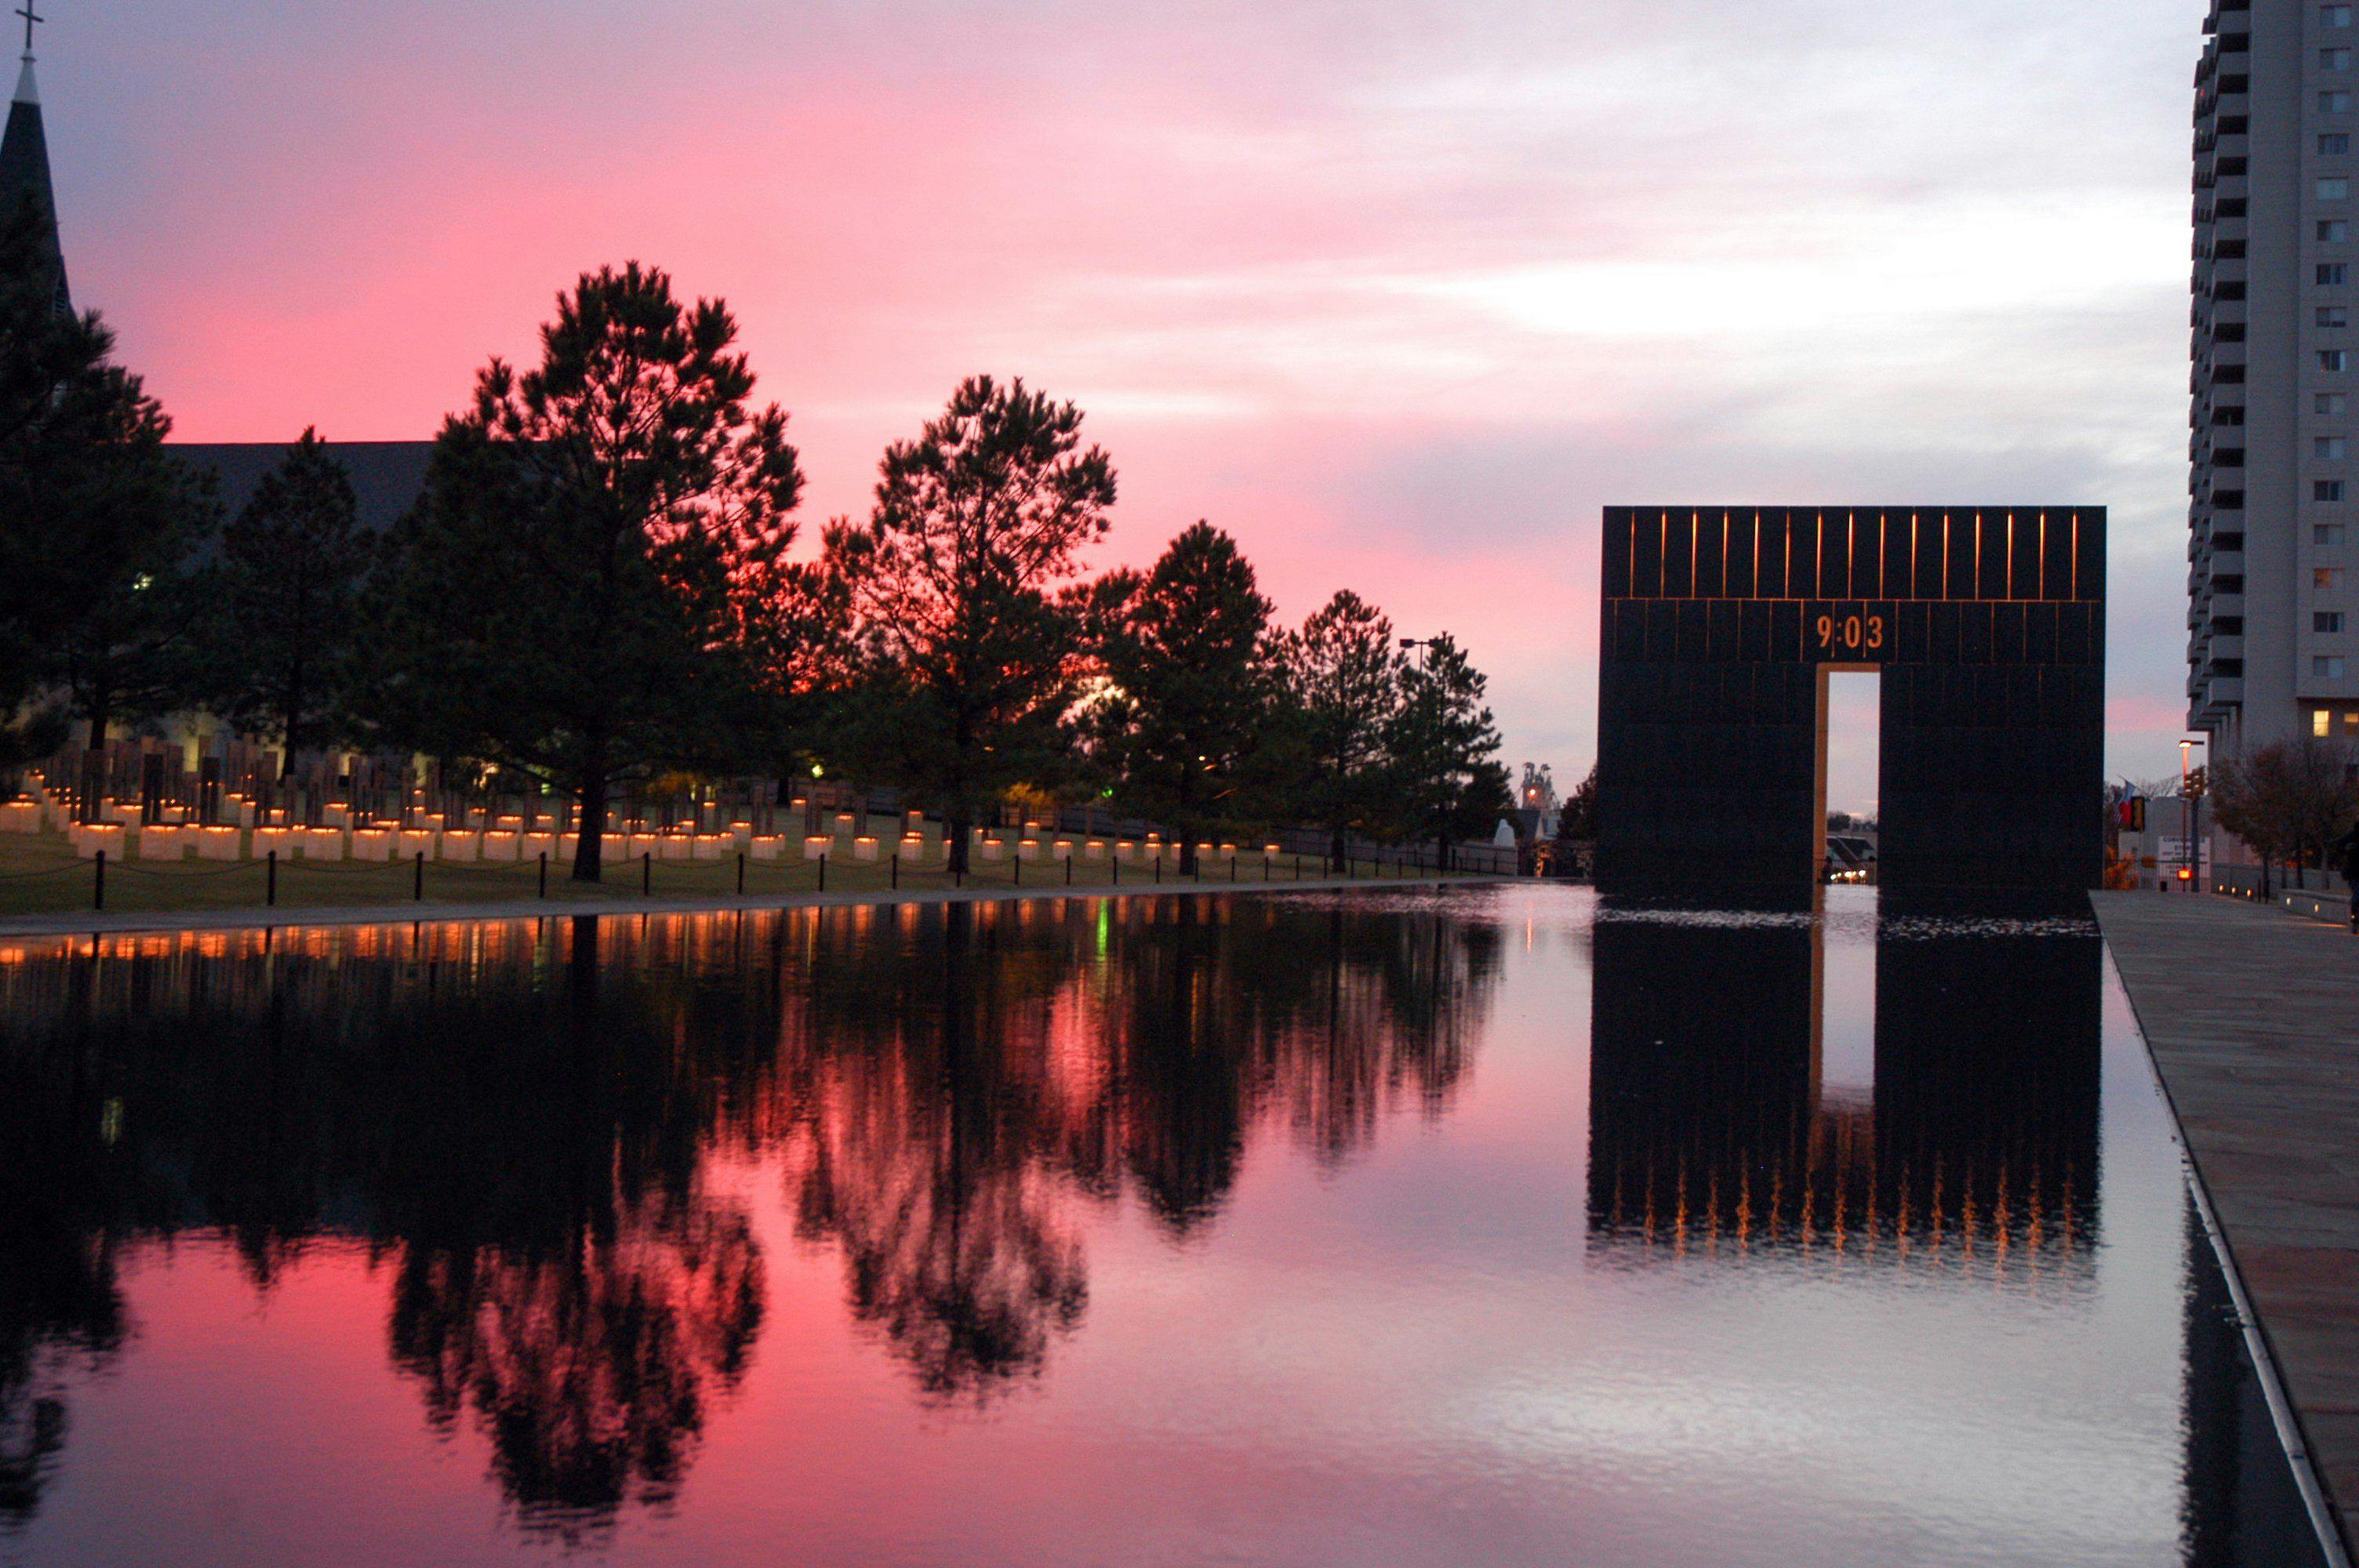 25 Years After the Oklahoma City Bombing